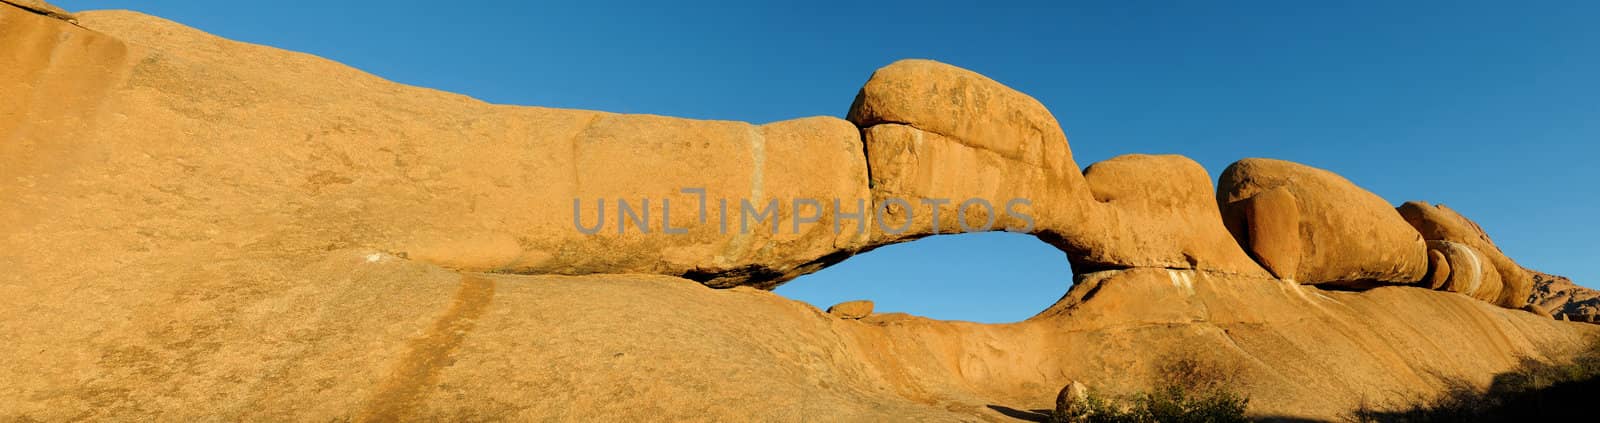 Panorama from four photos of the natural arch at Spitzkoppe in Namibia